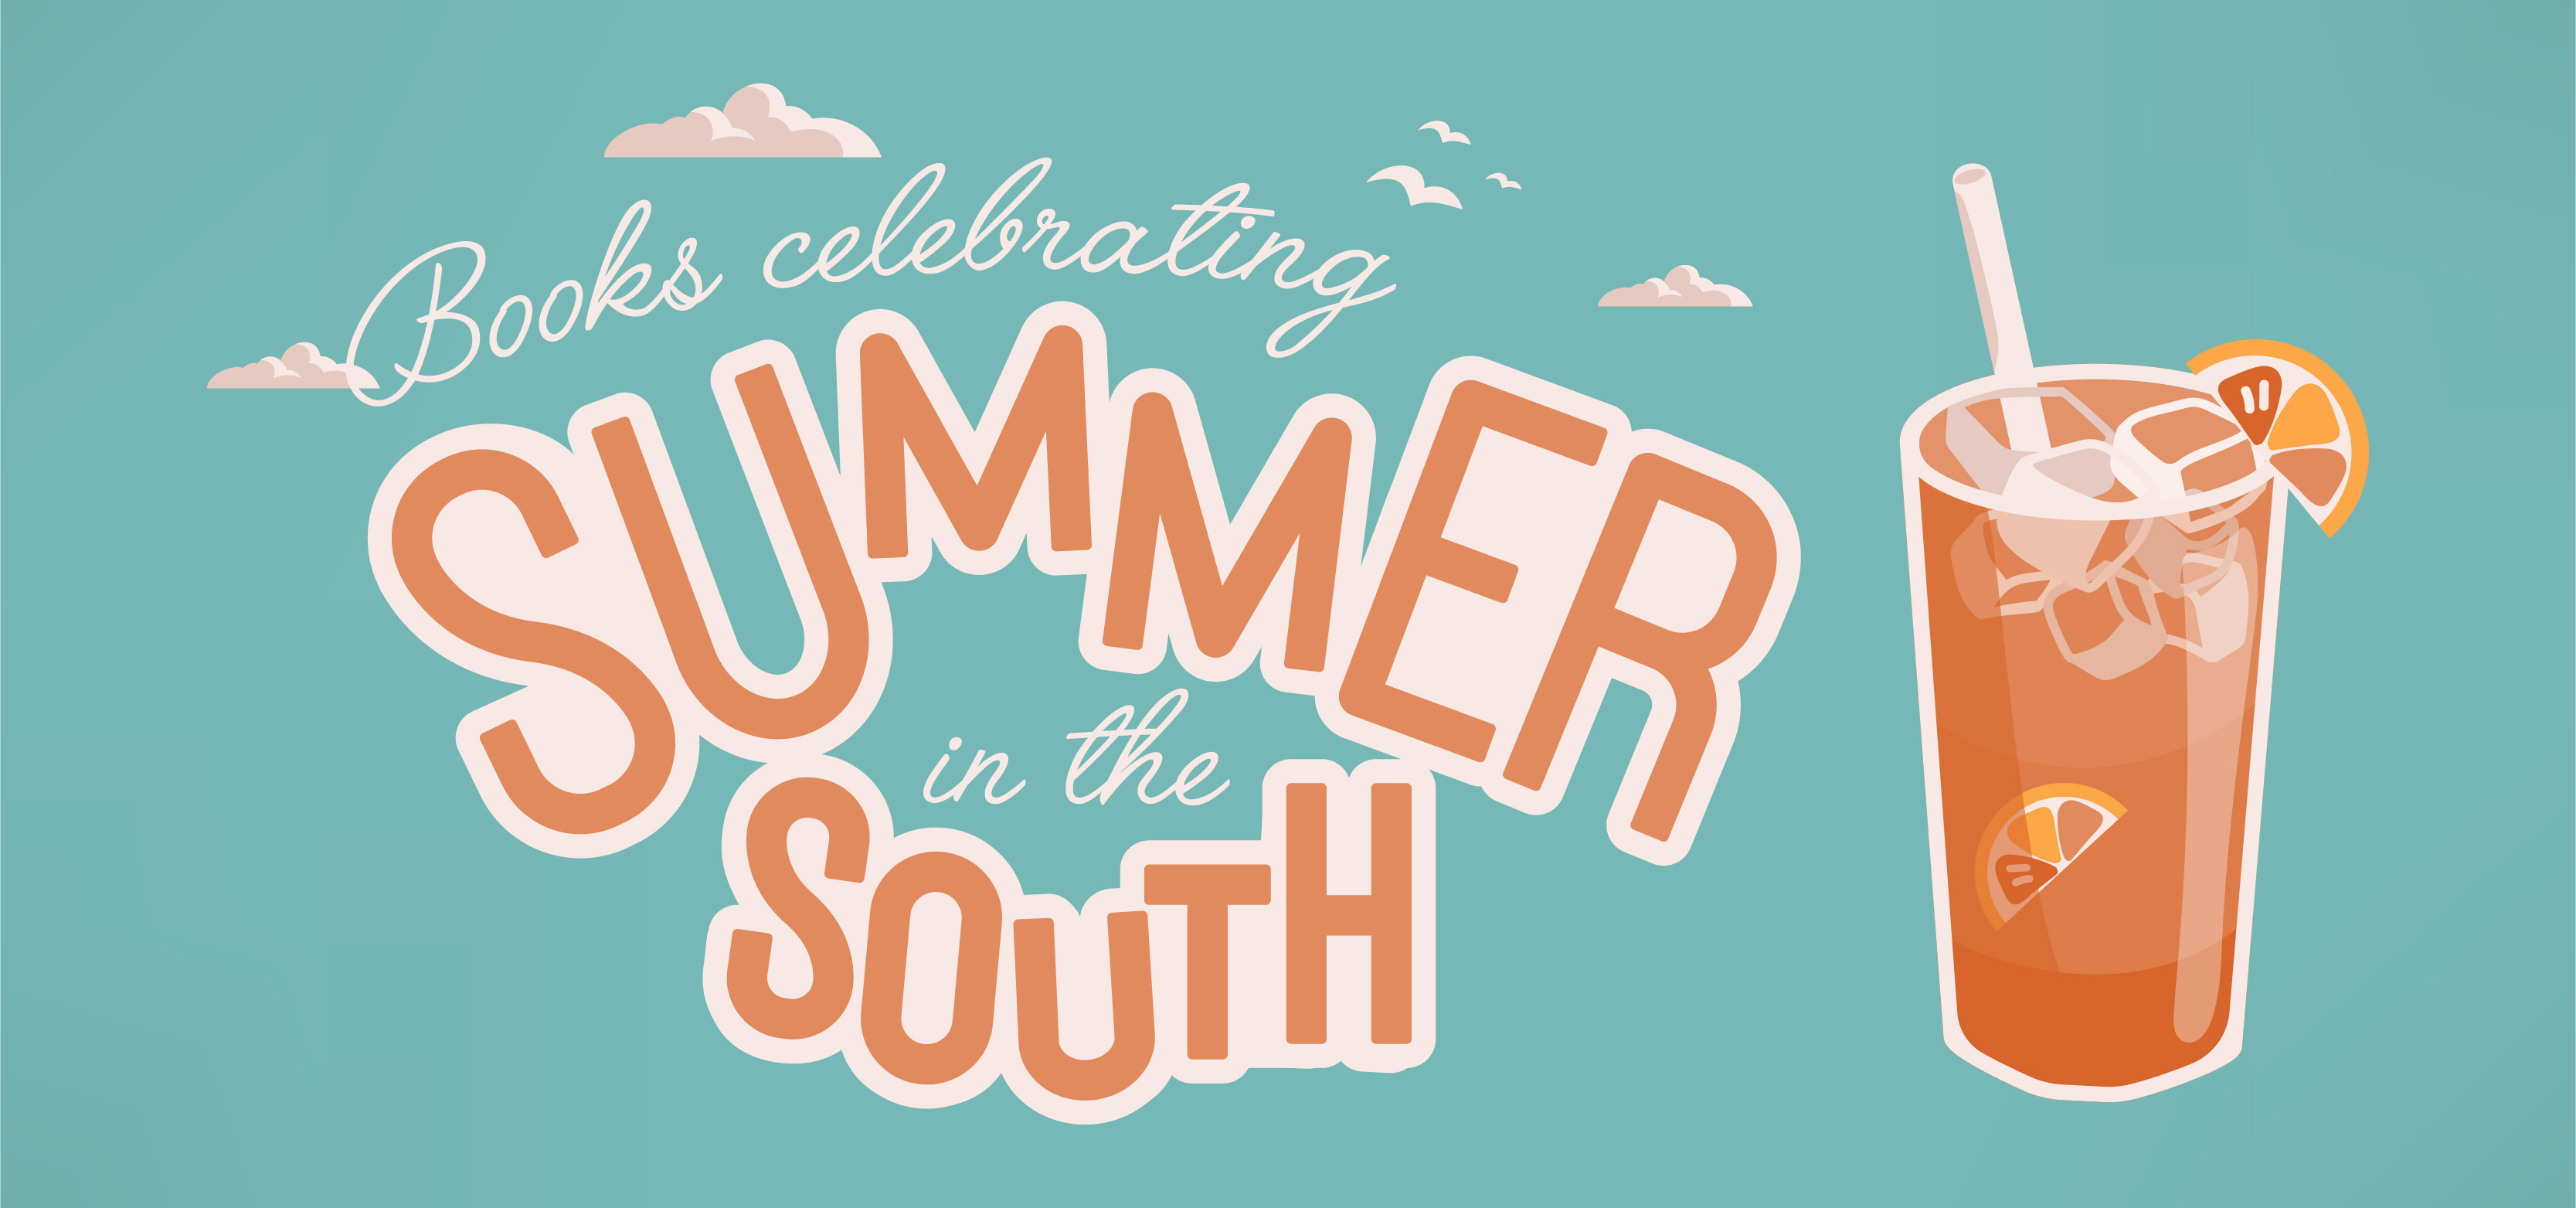 Books celebrating Summer in the South